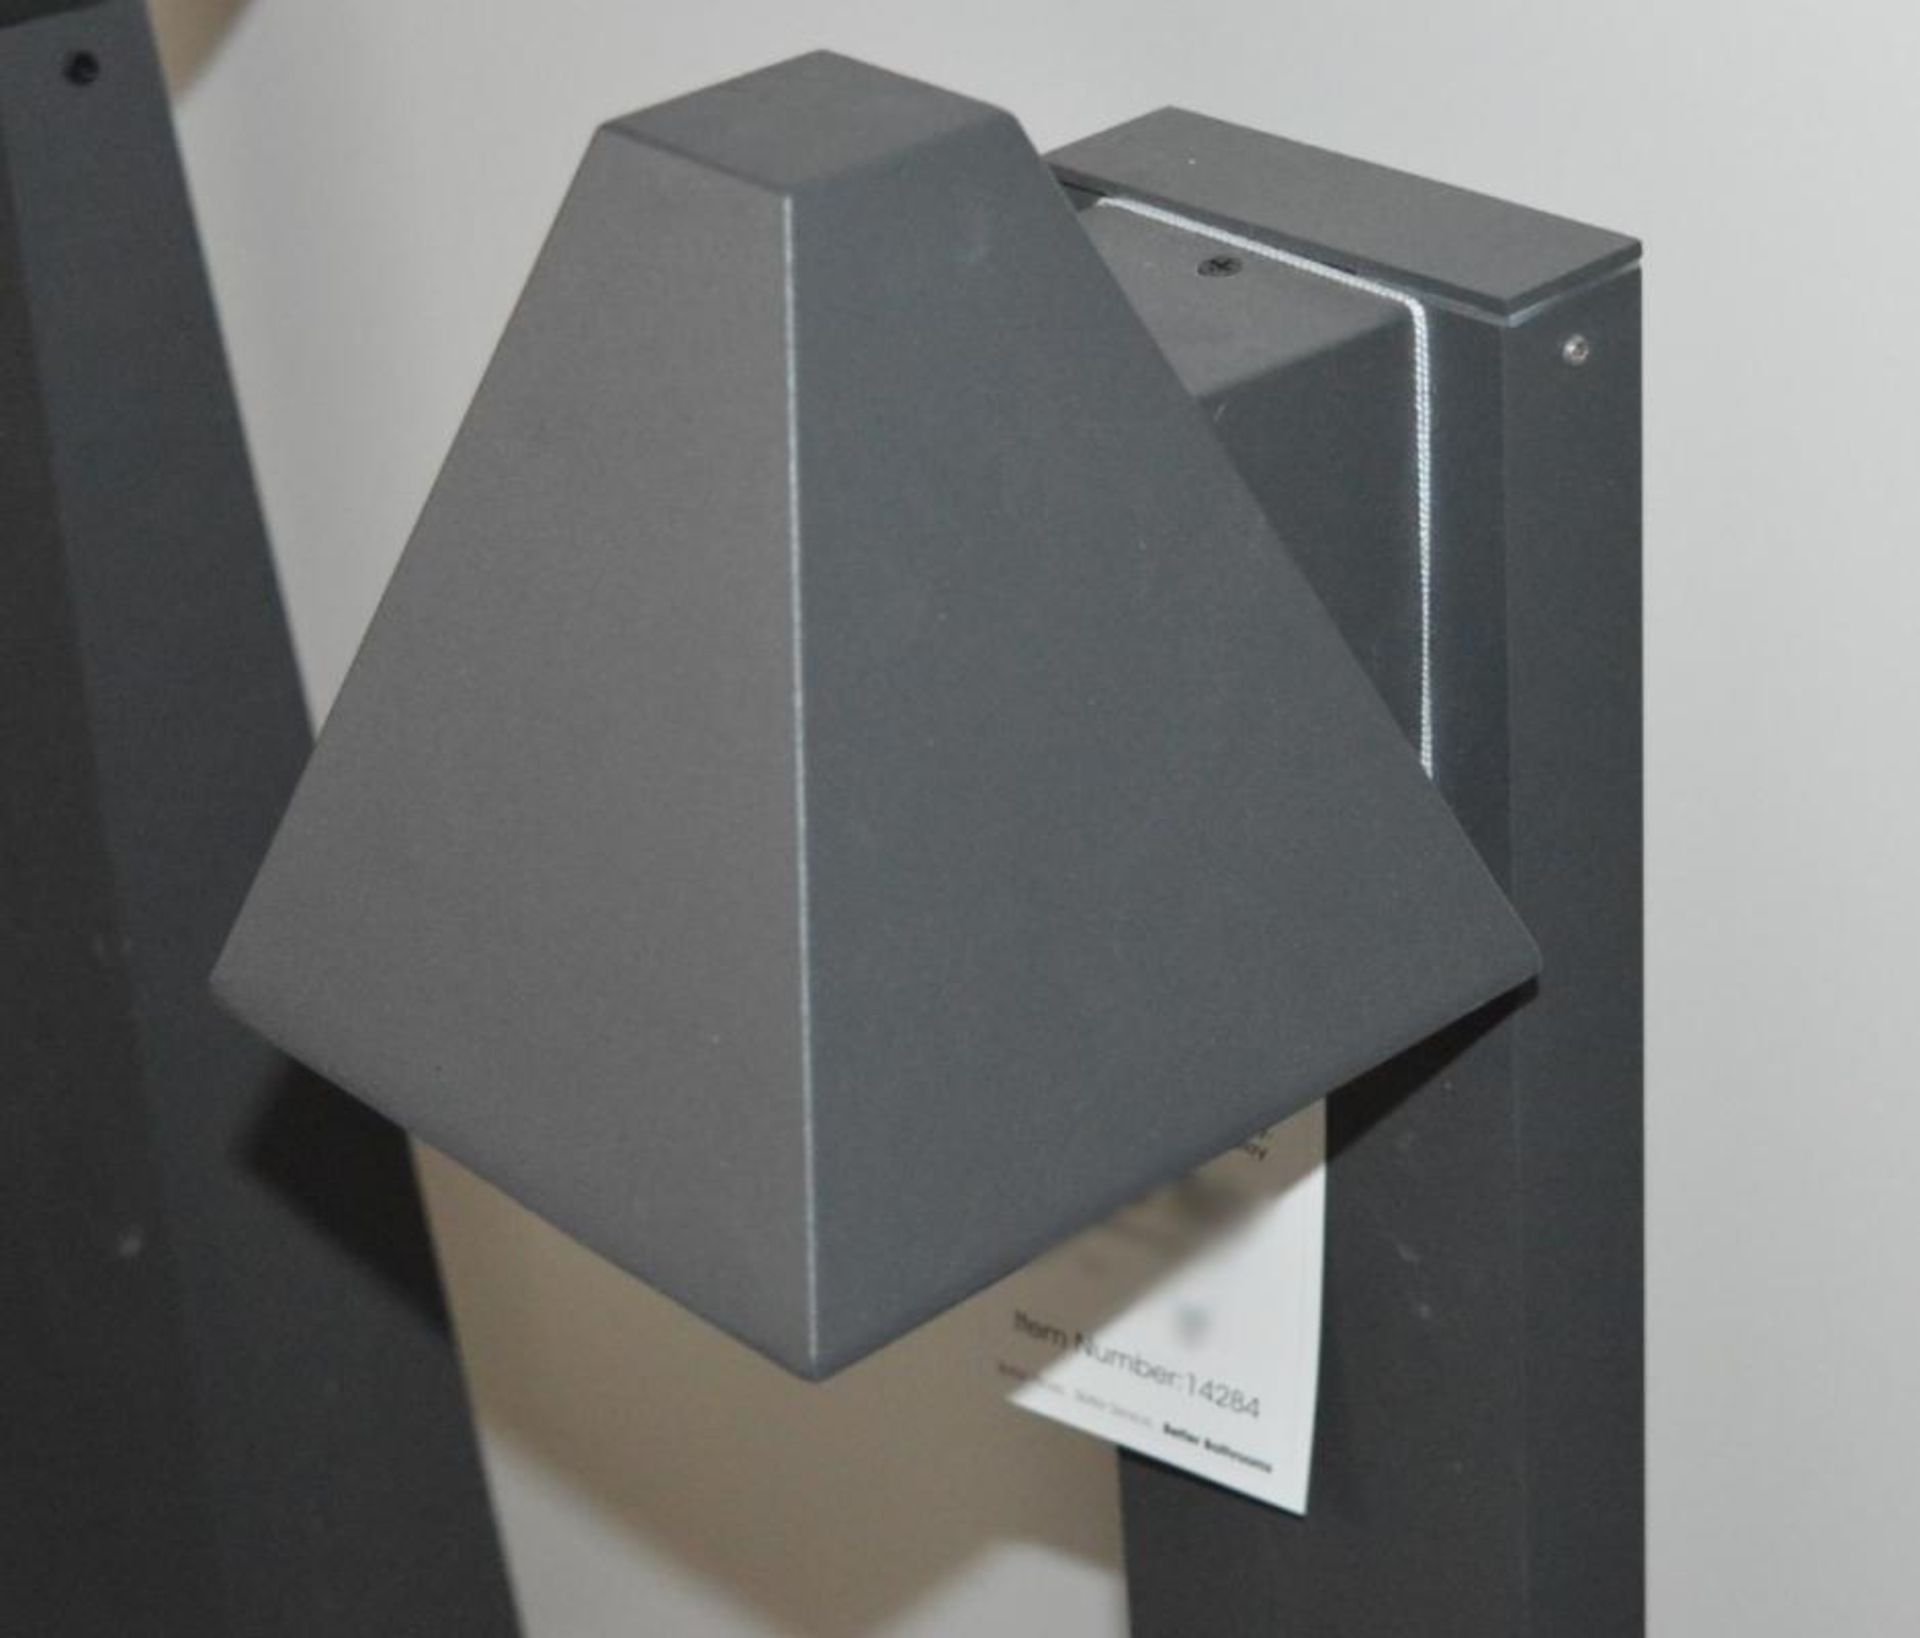 1 x 80cm Pyramid Outdoor Wall Light - Ex Display Stock - CL298 - Ref: J230 - Location: - Image 3 of 3